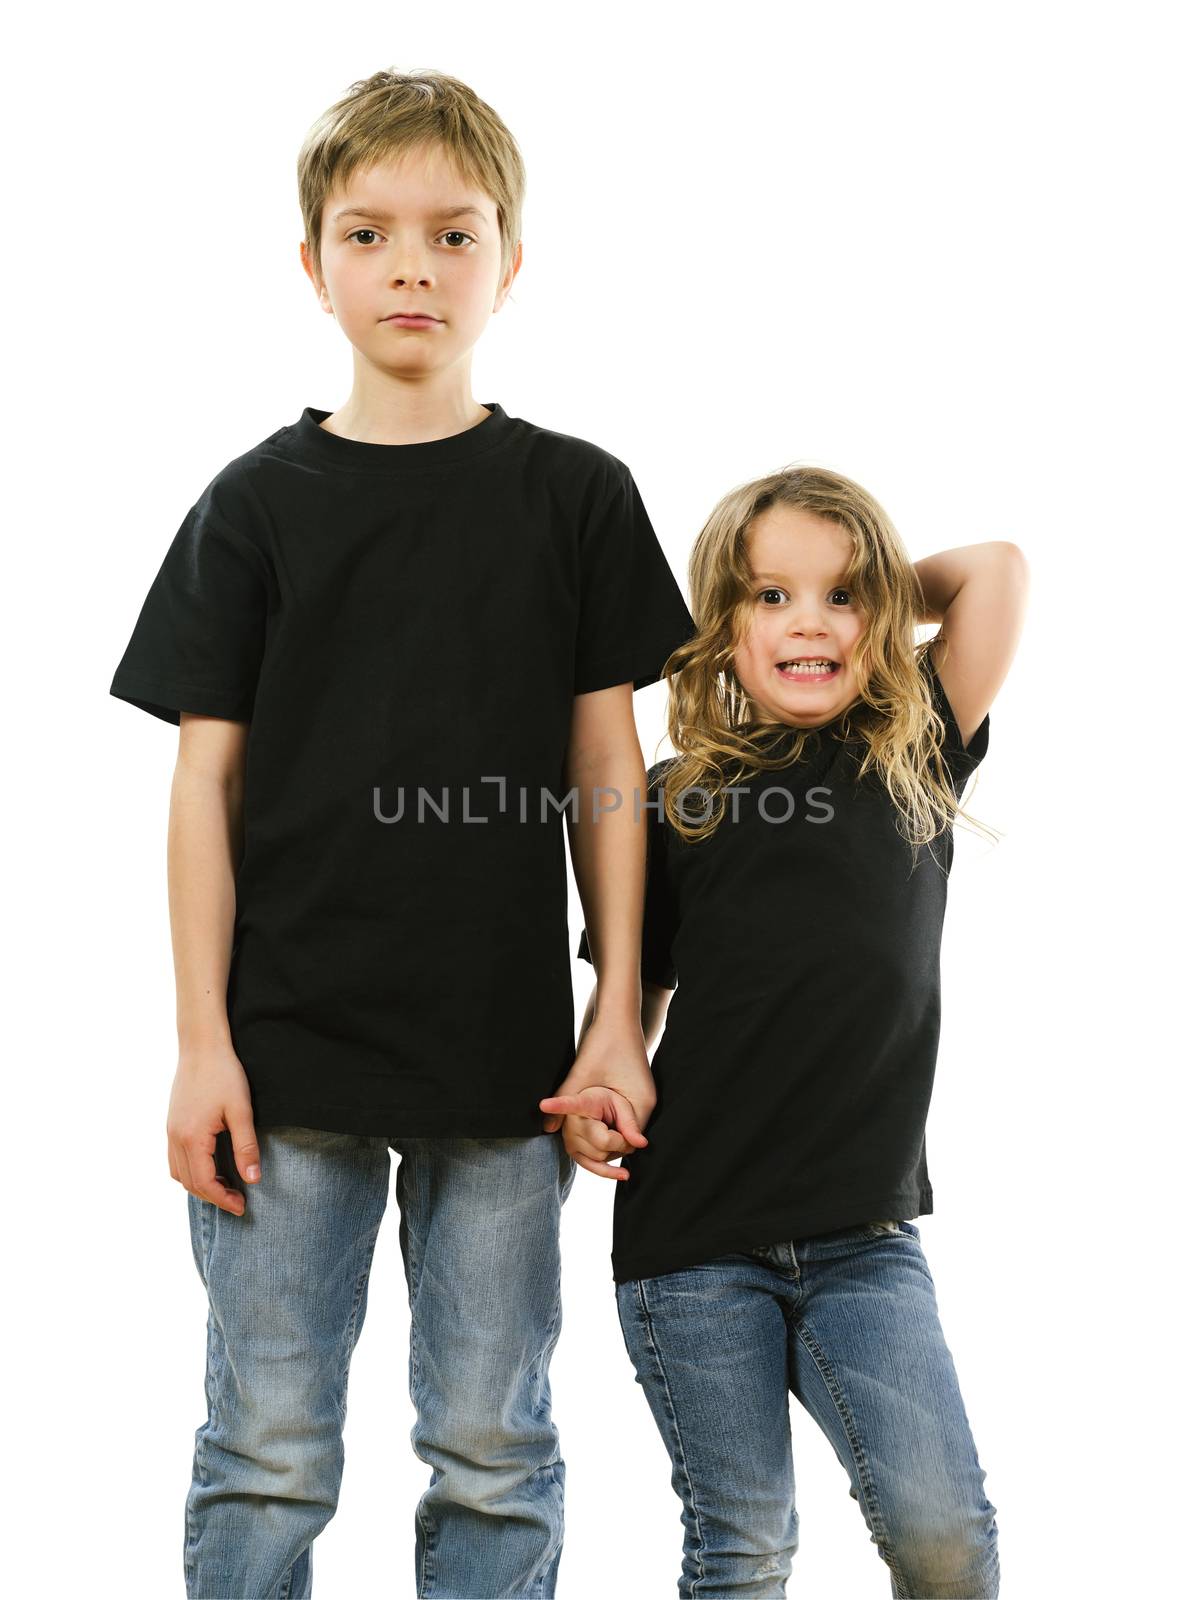 Young children wearing blank black shirts by sumners